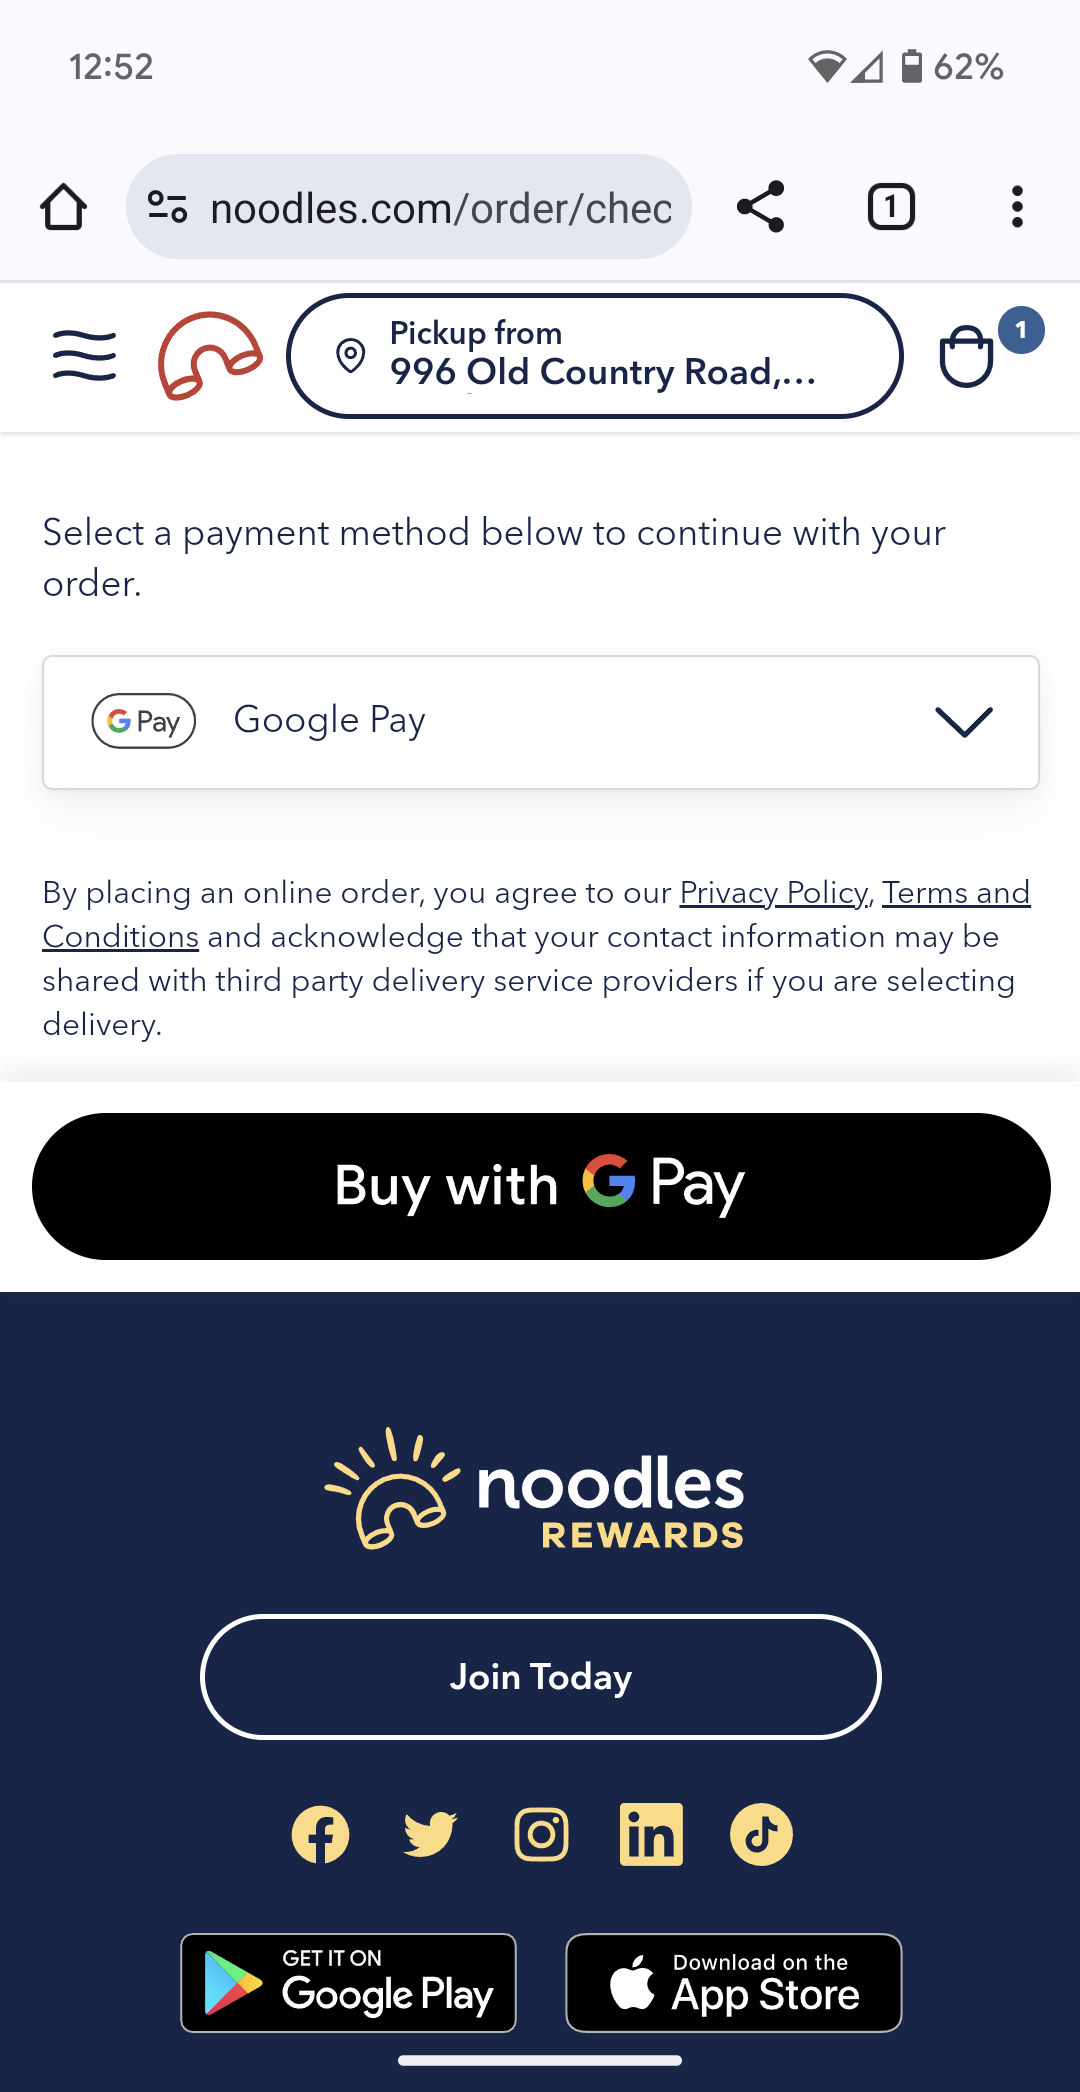 Noodles & Company accepts Google Pay on its website.